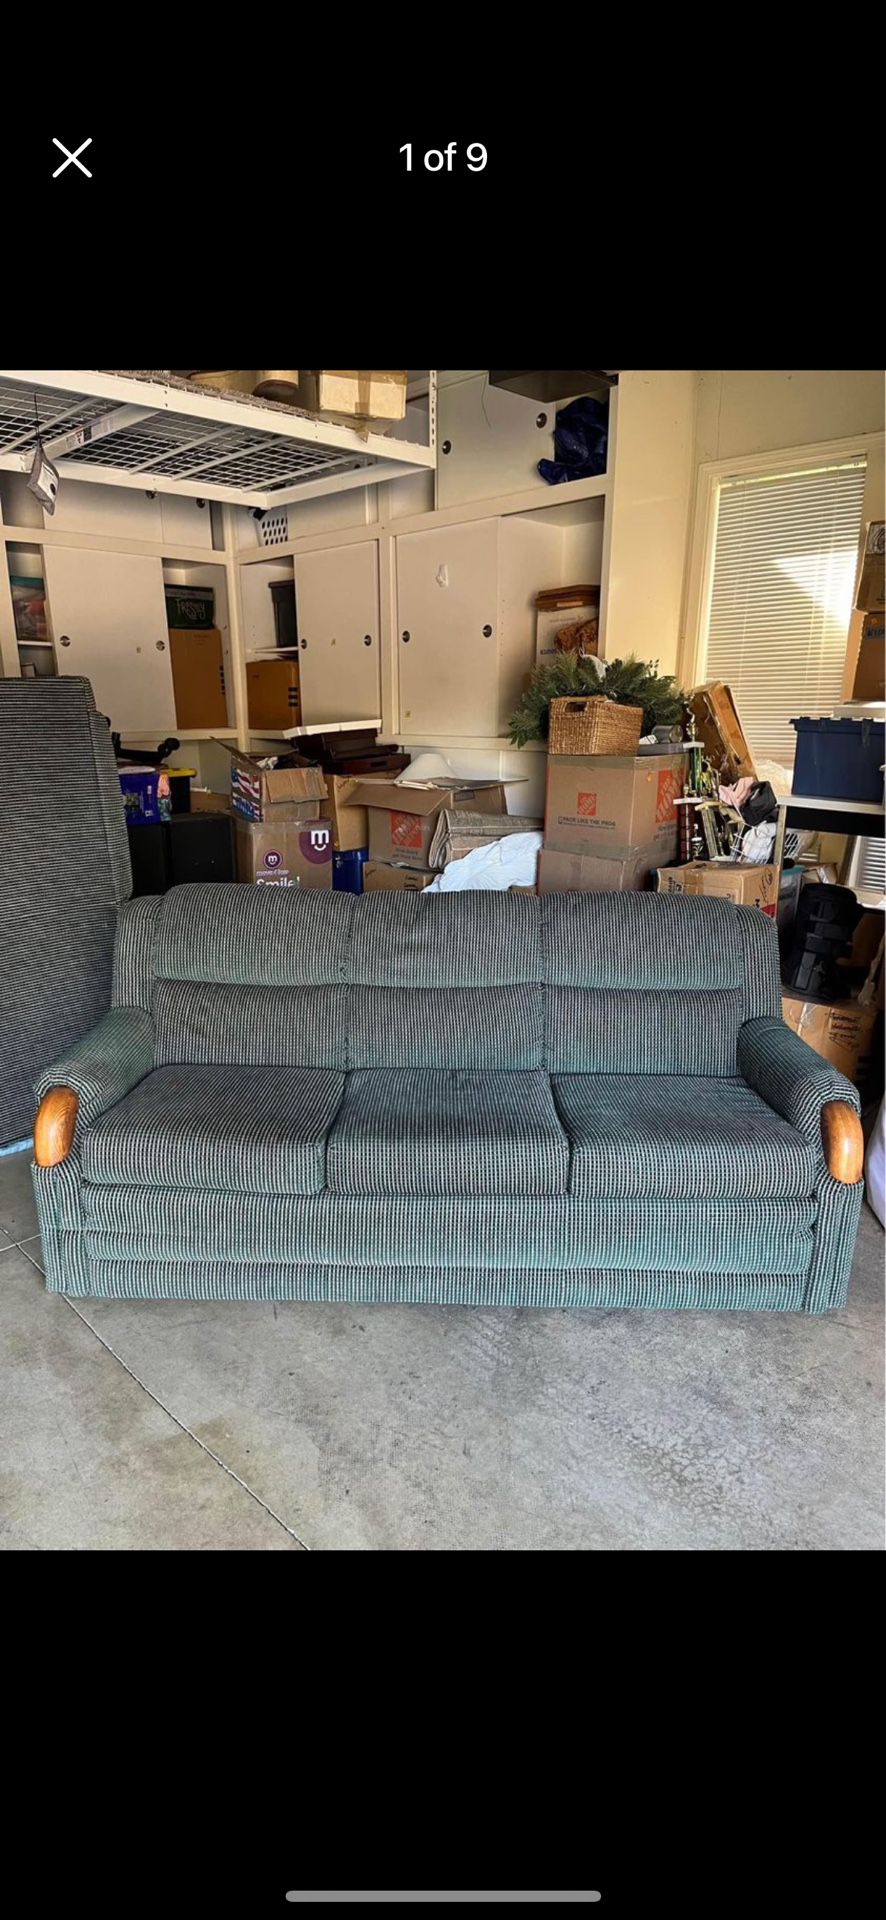 Vintage Couch And Loveseat 